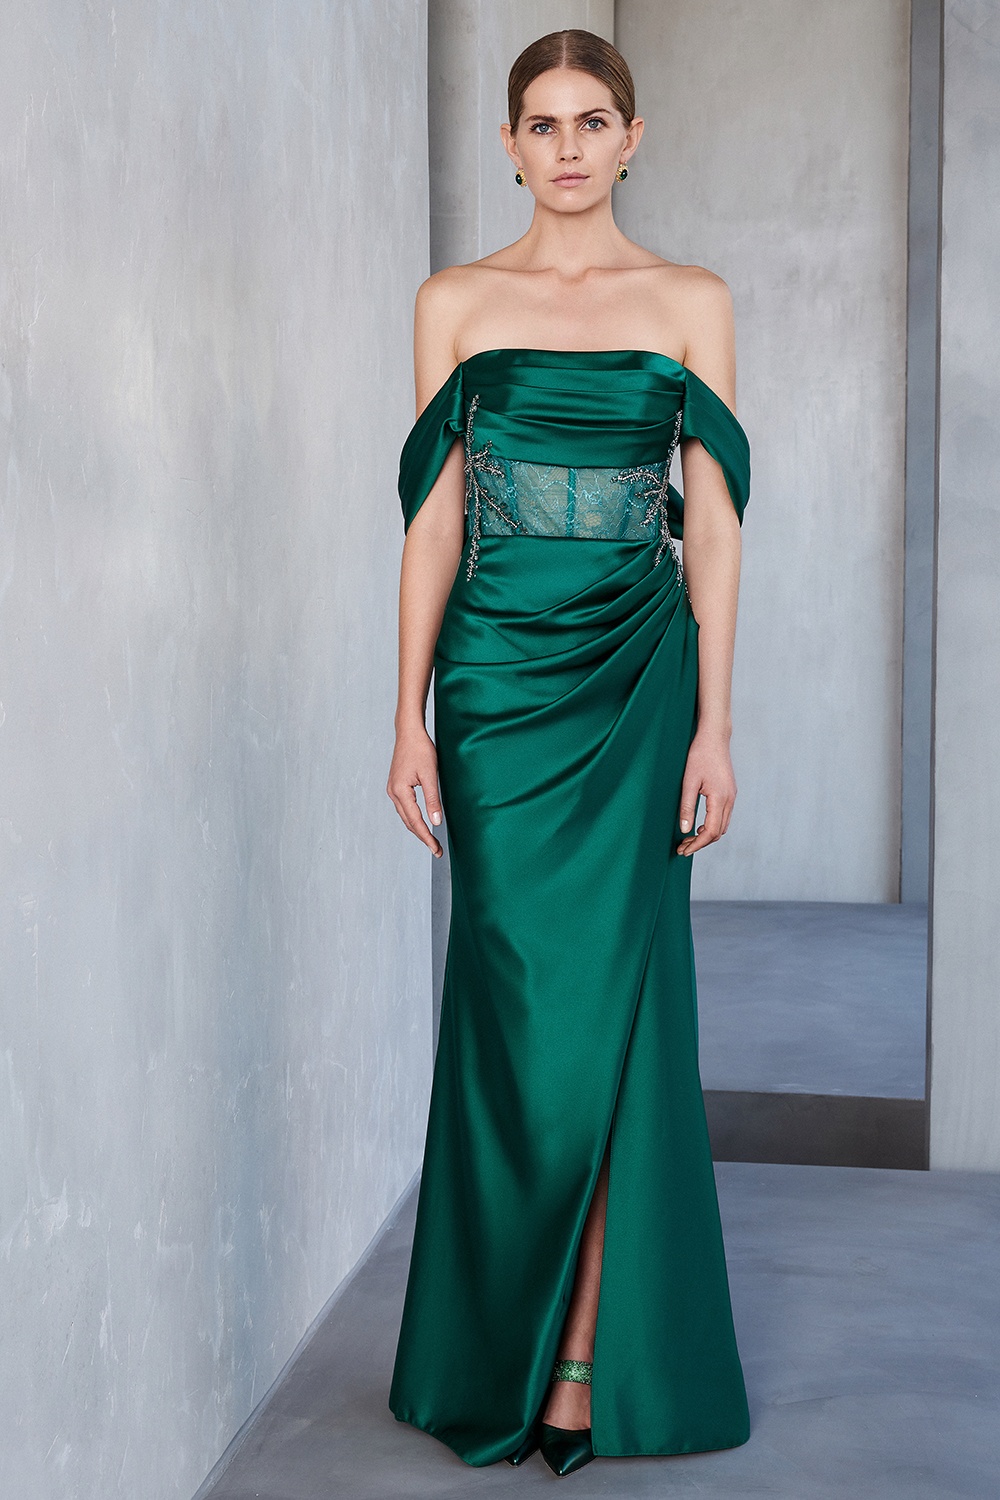 Long evening satin dress with lace and beading at the top